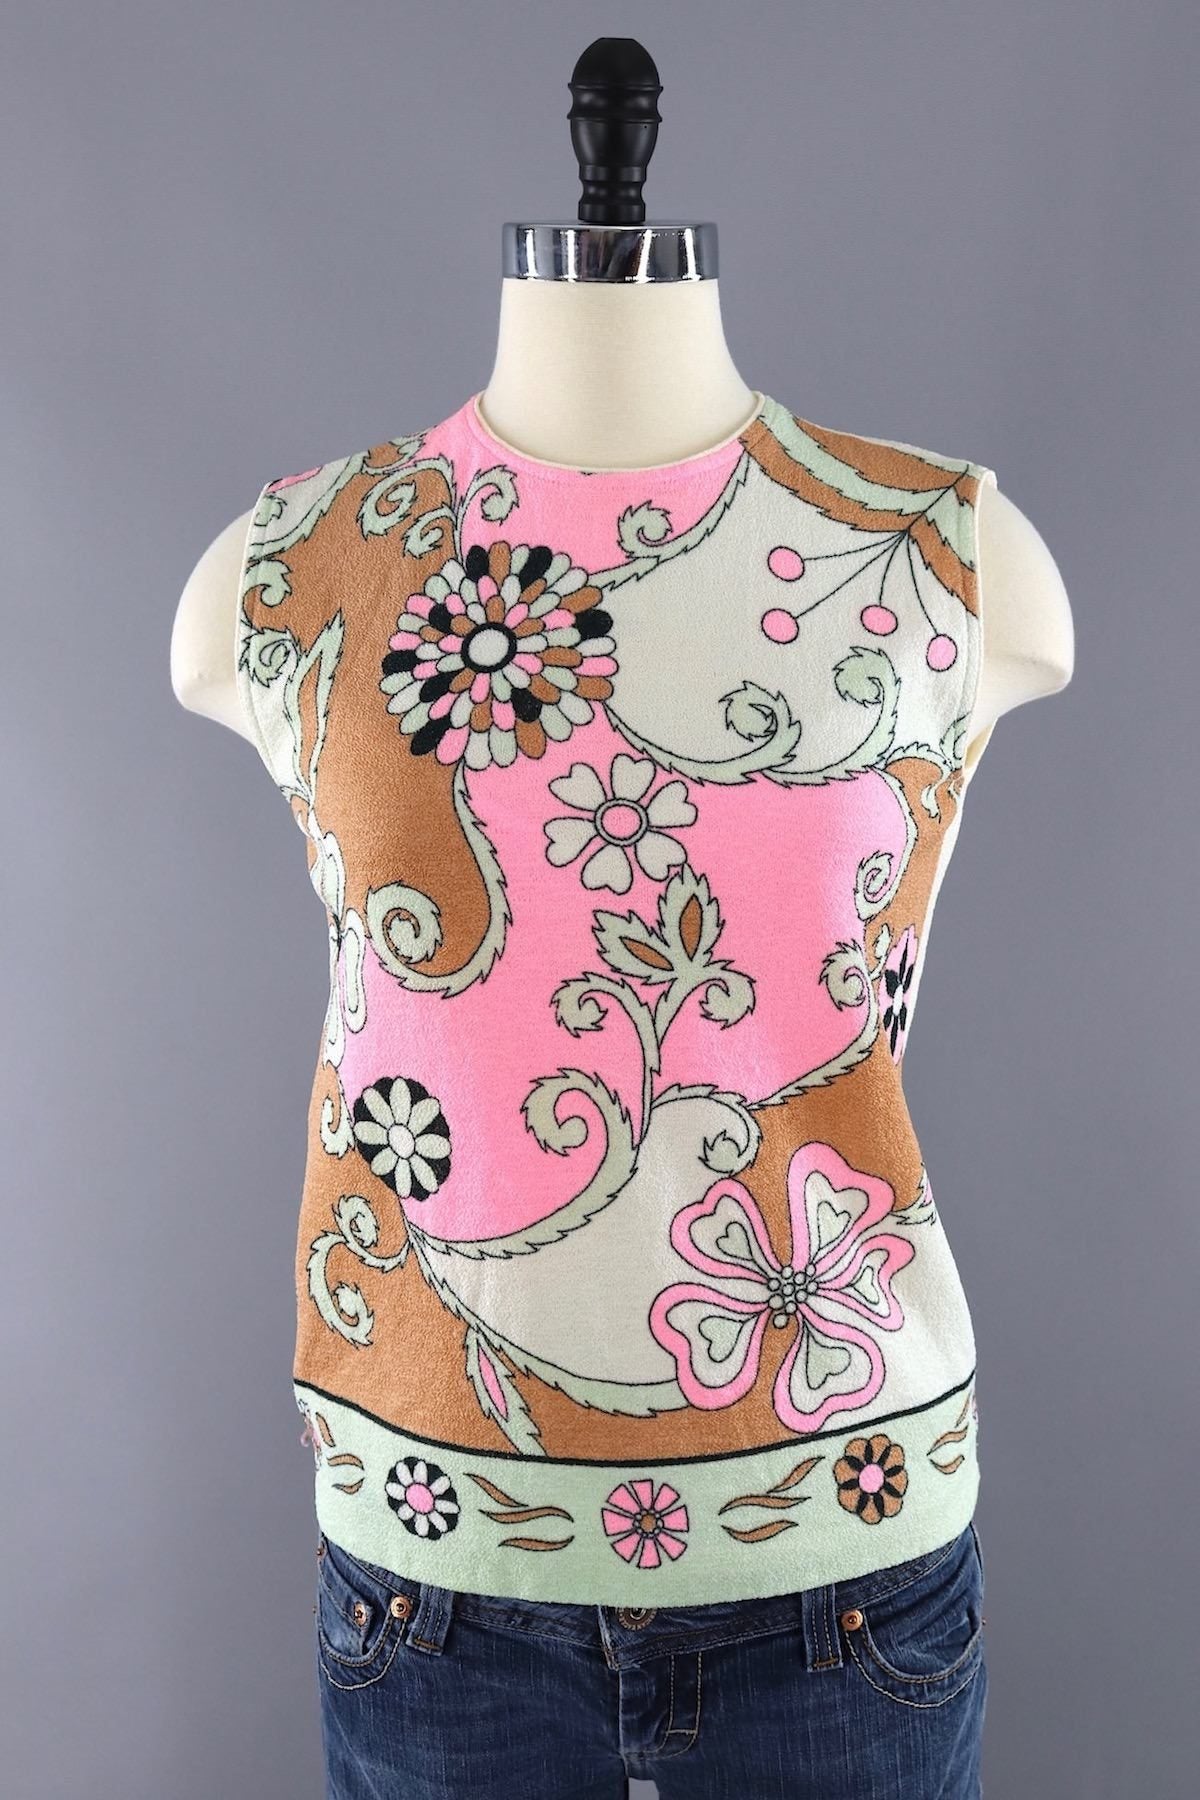 Vintage 1960s Pink Mod Floral Sleeveless Top - ThisBlueBird